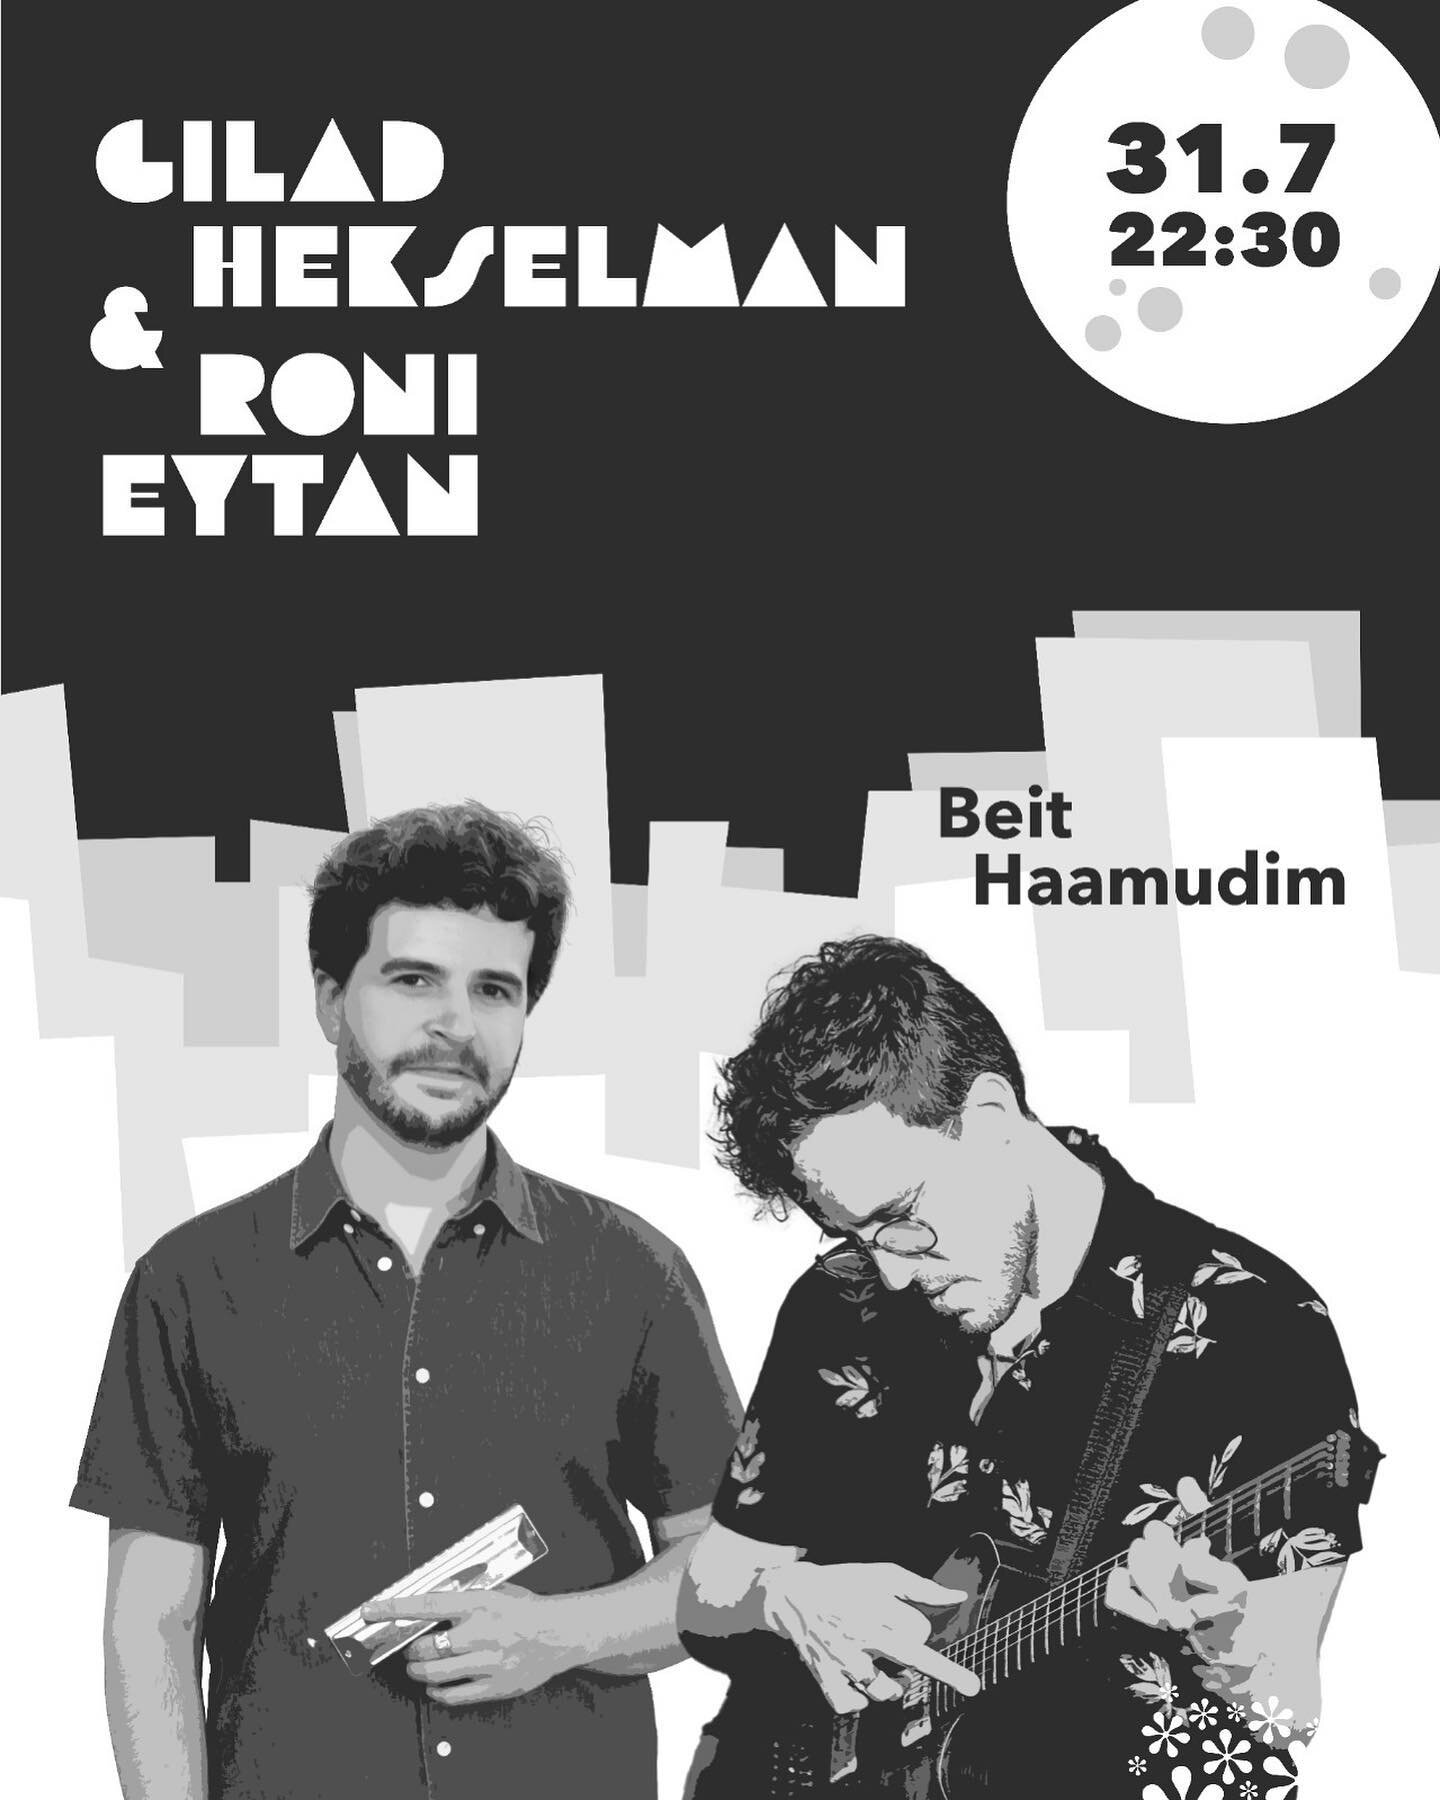 Tomorrow! (Sunday 31.7)
Playing with @ghex at @beithaamudim 
One set, 22:30 
See you there! 

Poster: @theo.slivnik 
.
.
.
.
.
#ghex #ronieytan #beithaamudim #duet #israelijazz #harmonicaplayer #giladhekselman